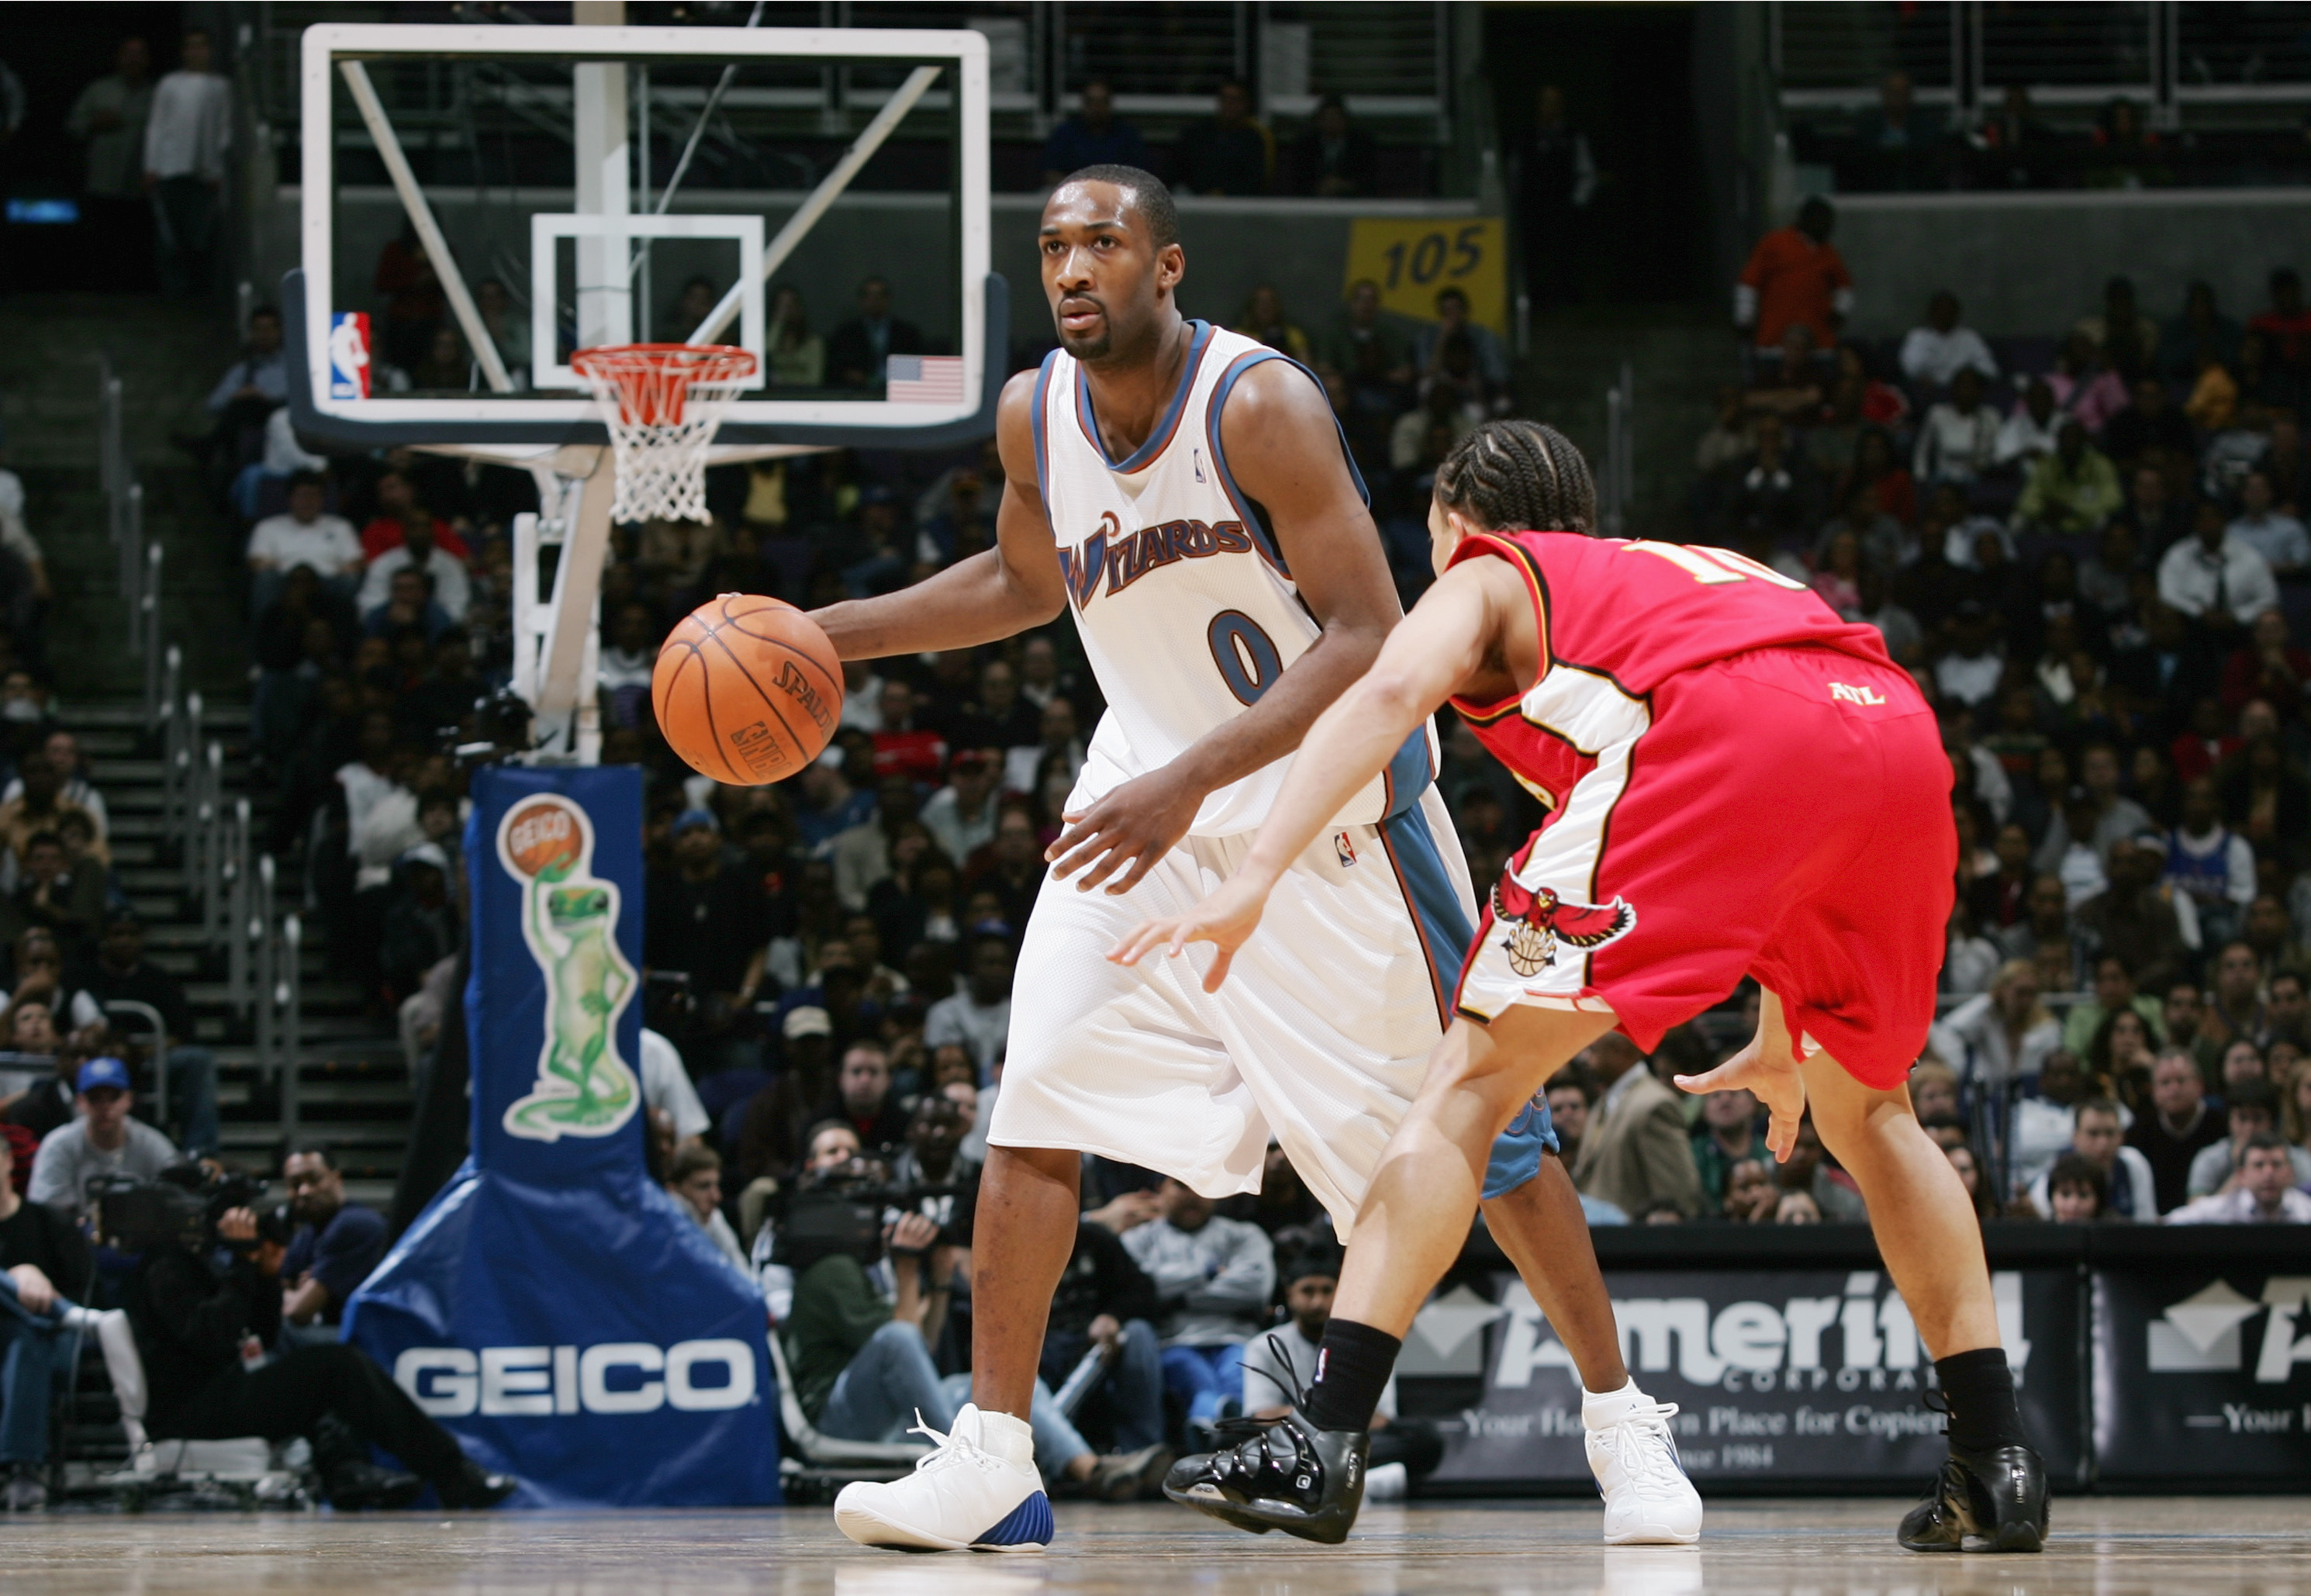 Signature sneakers: How long did it take NBA players to get their own shoe?, HoopsHype